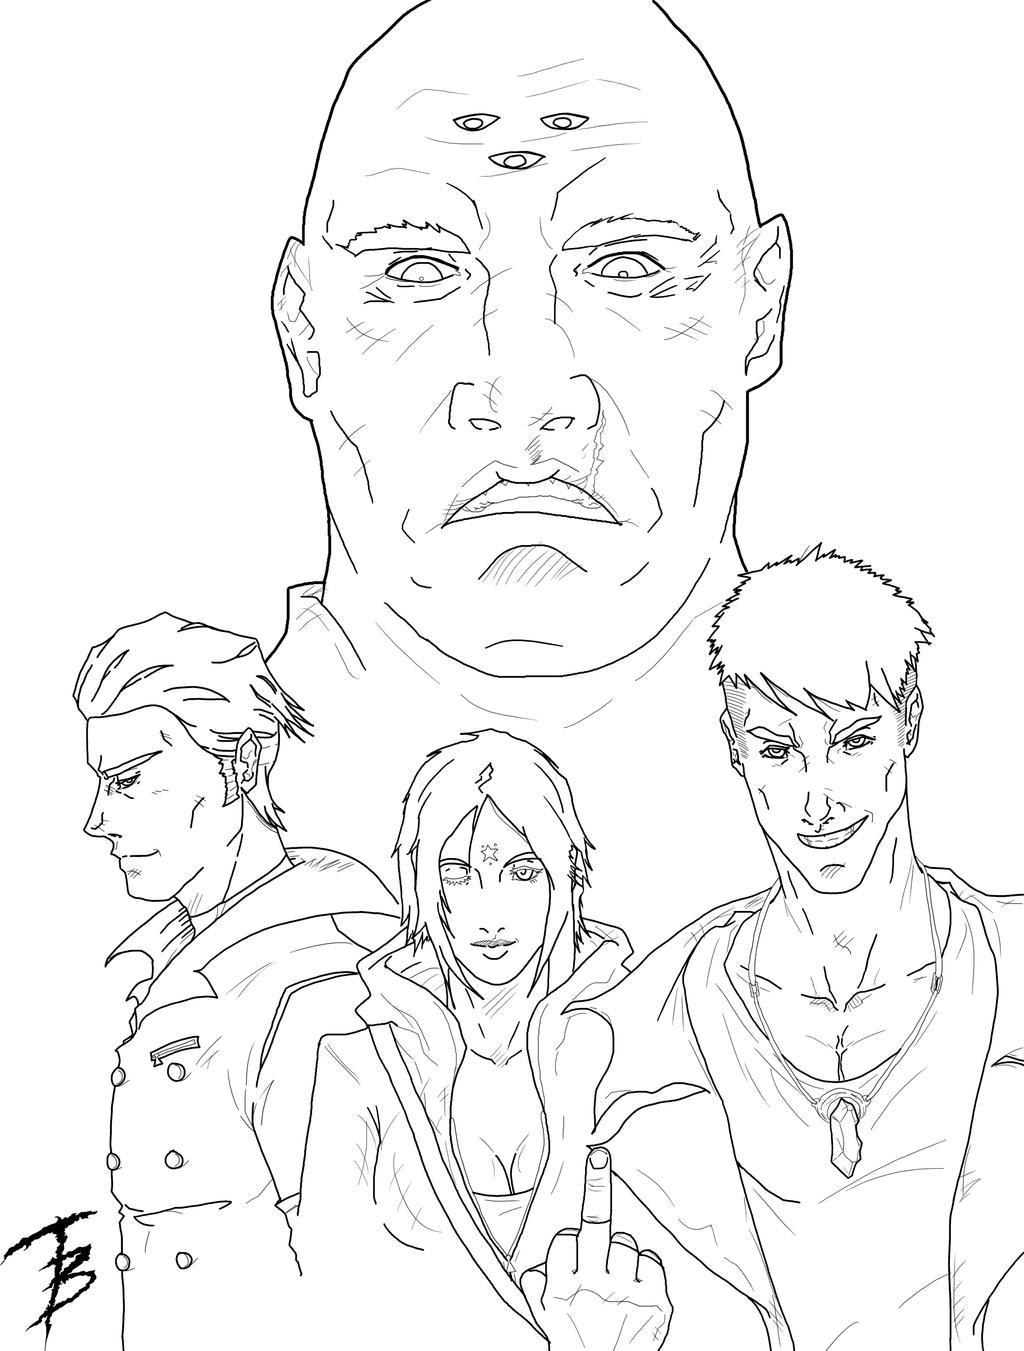 DMC dont fuck with a god (lineart) WIP